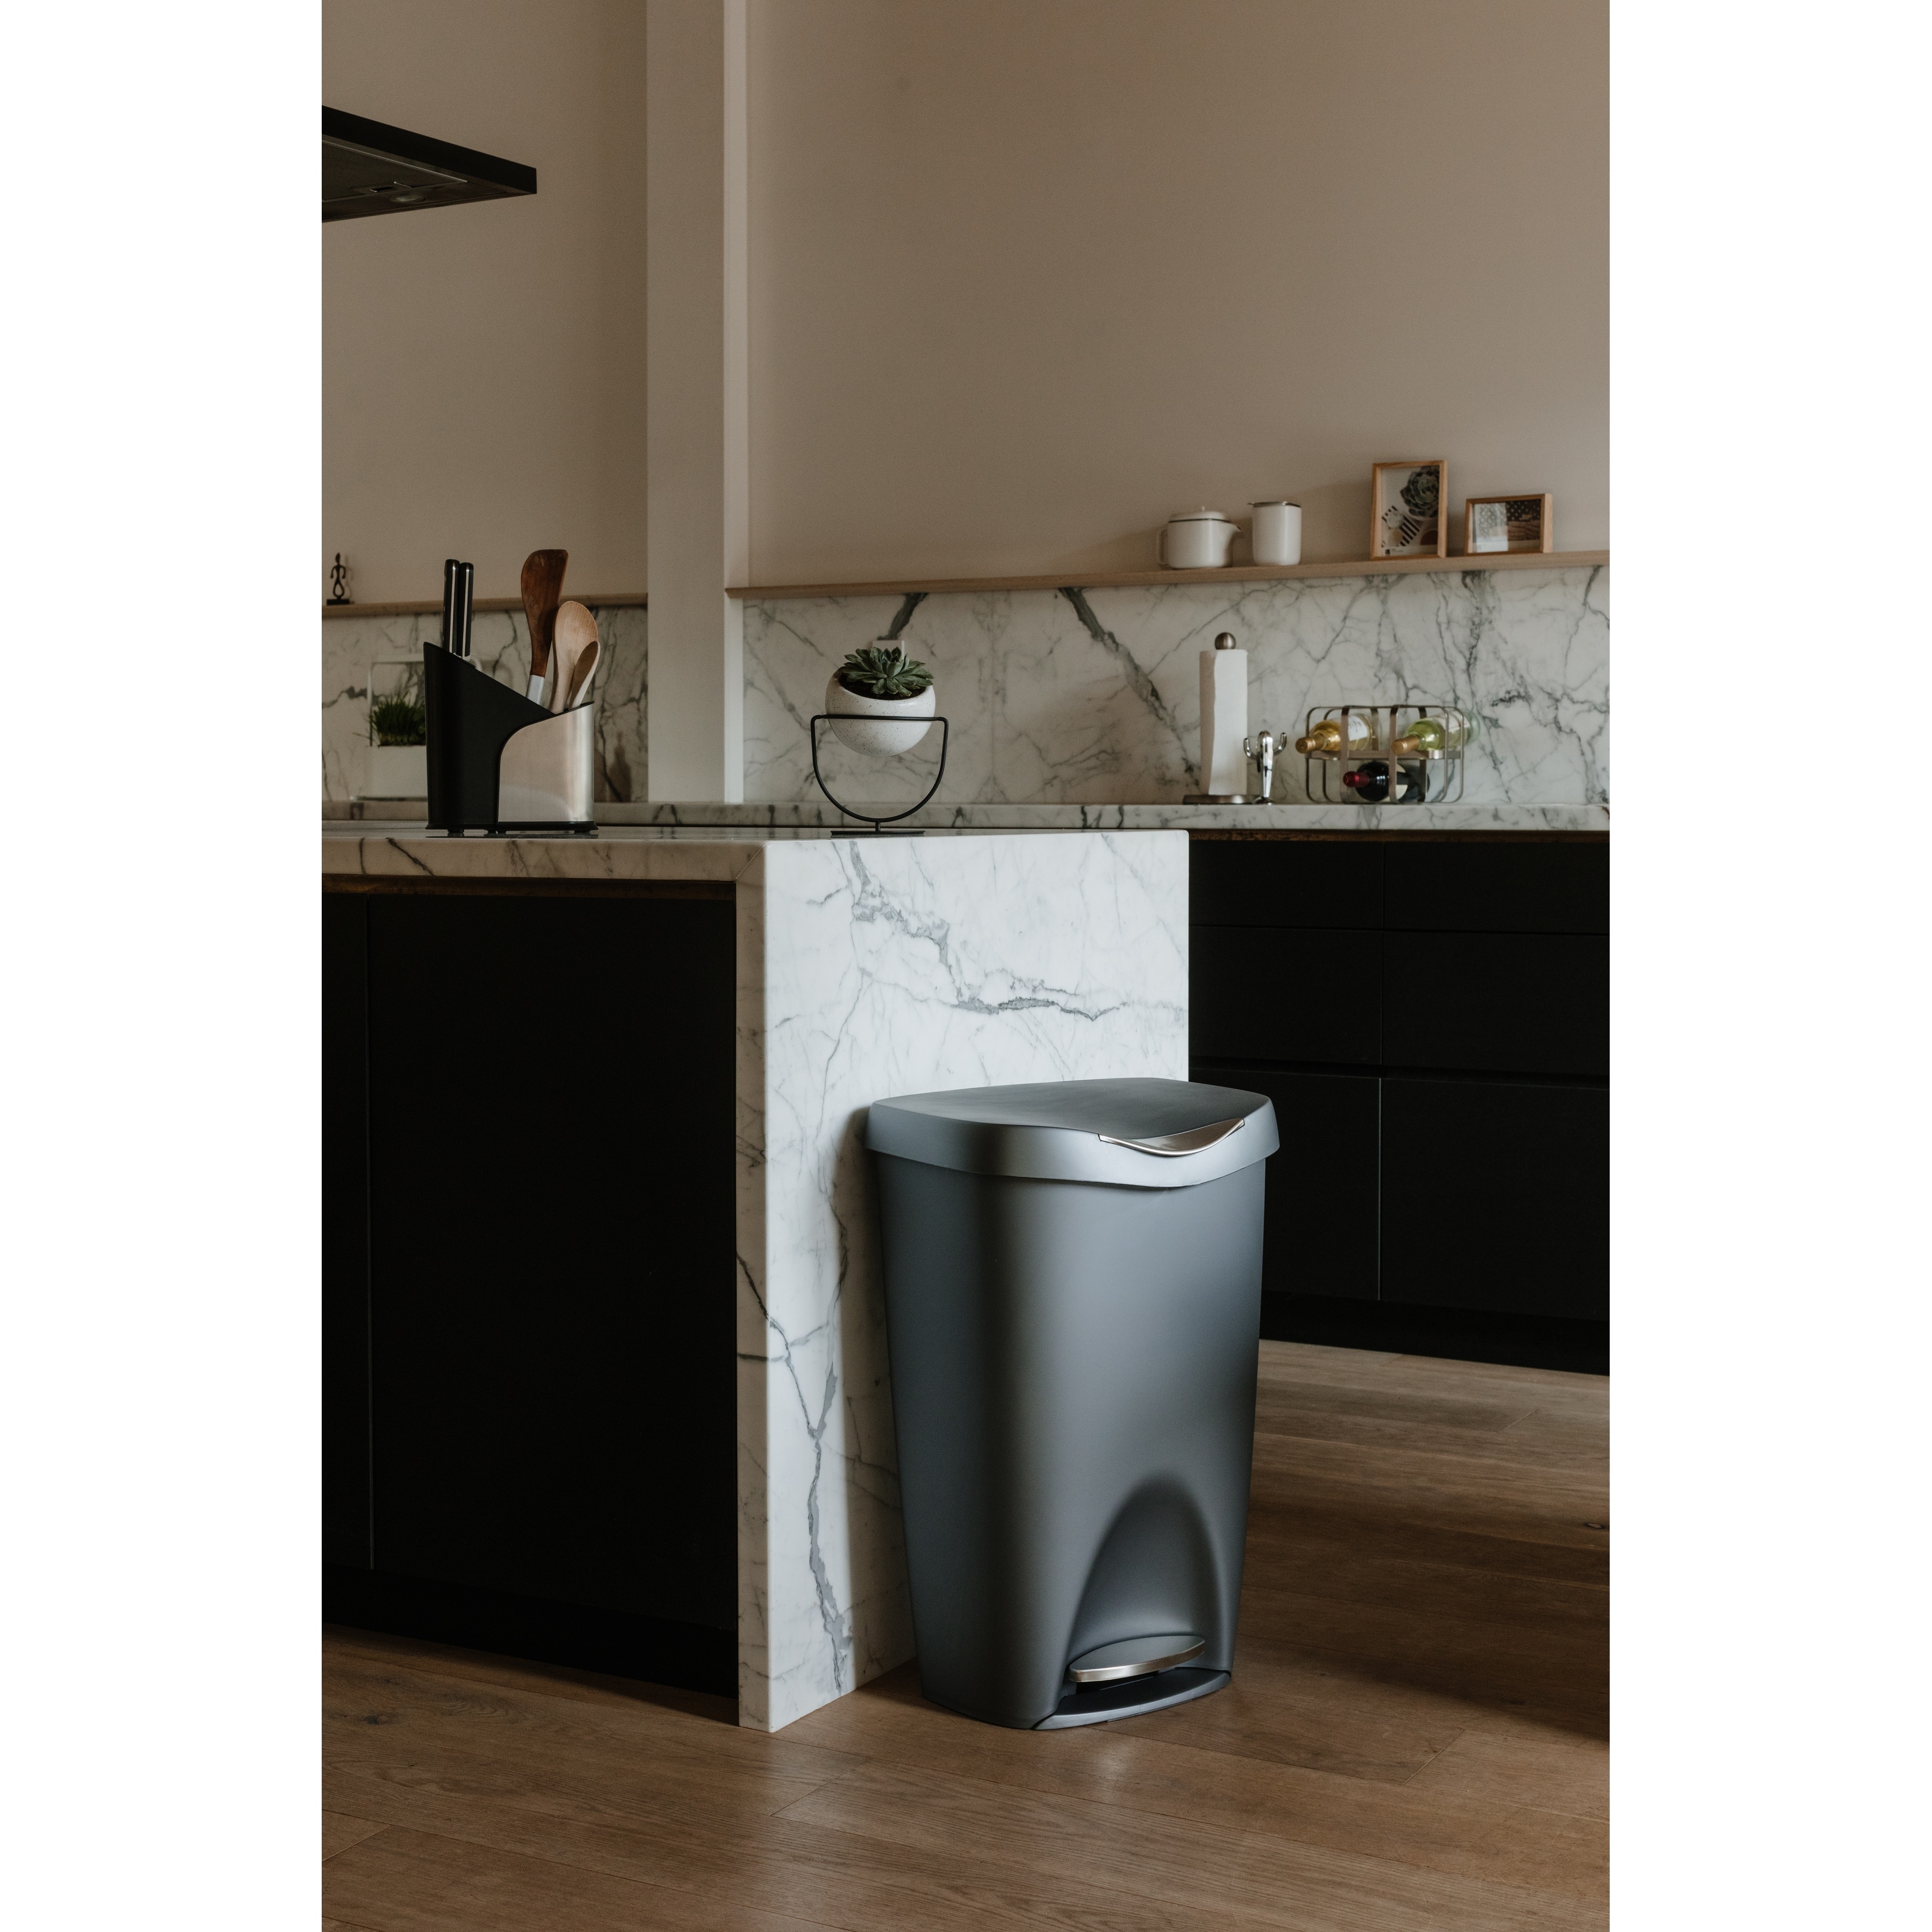 https://ak1.ostkcdn.com/images/products/is/images/direct/35ec6c31e014b8089771cd80ecbaa730728b362e/Umbra-Brim-Large-13-Gallon-Trash-Can-with-Foot-Pedal-and-Lid.jpg